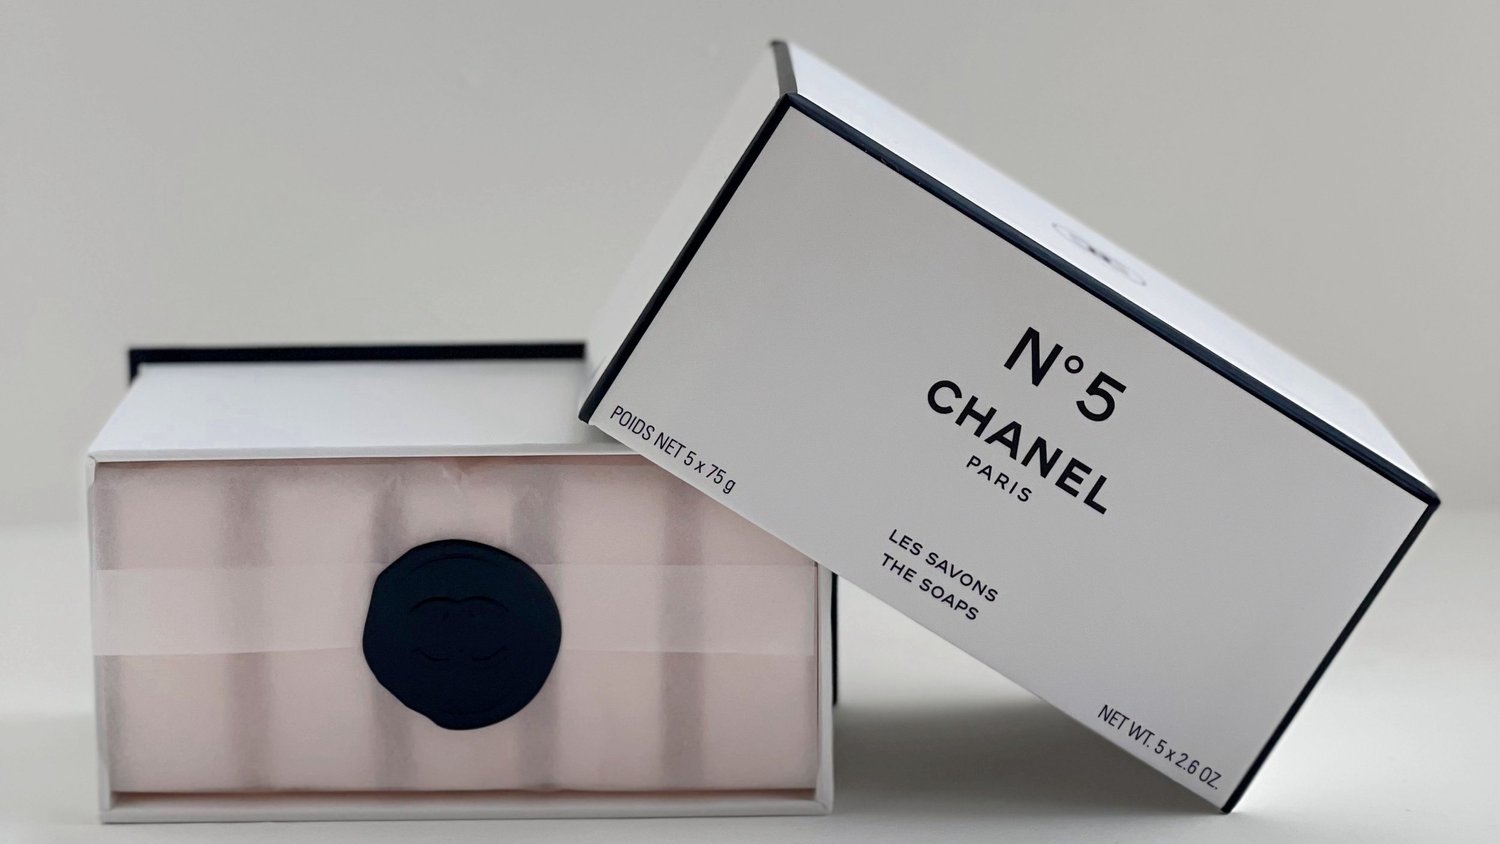 Chanel Perfume Bottles: How to Date Chanel Bottles